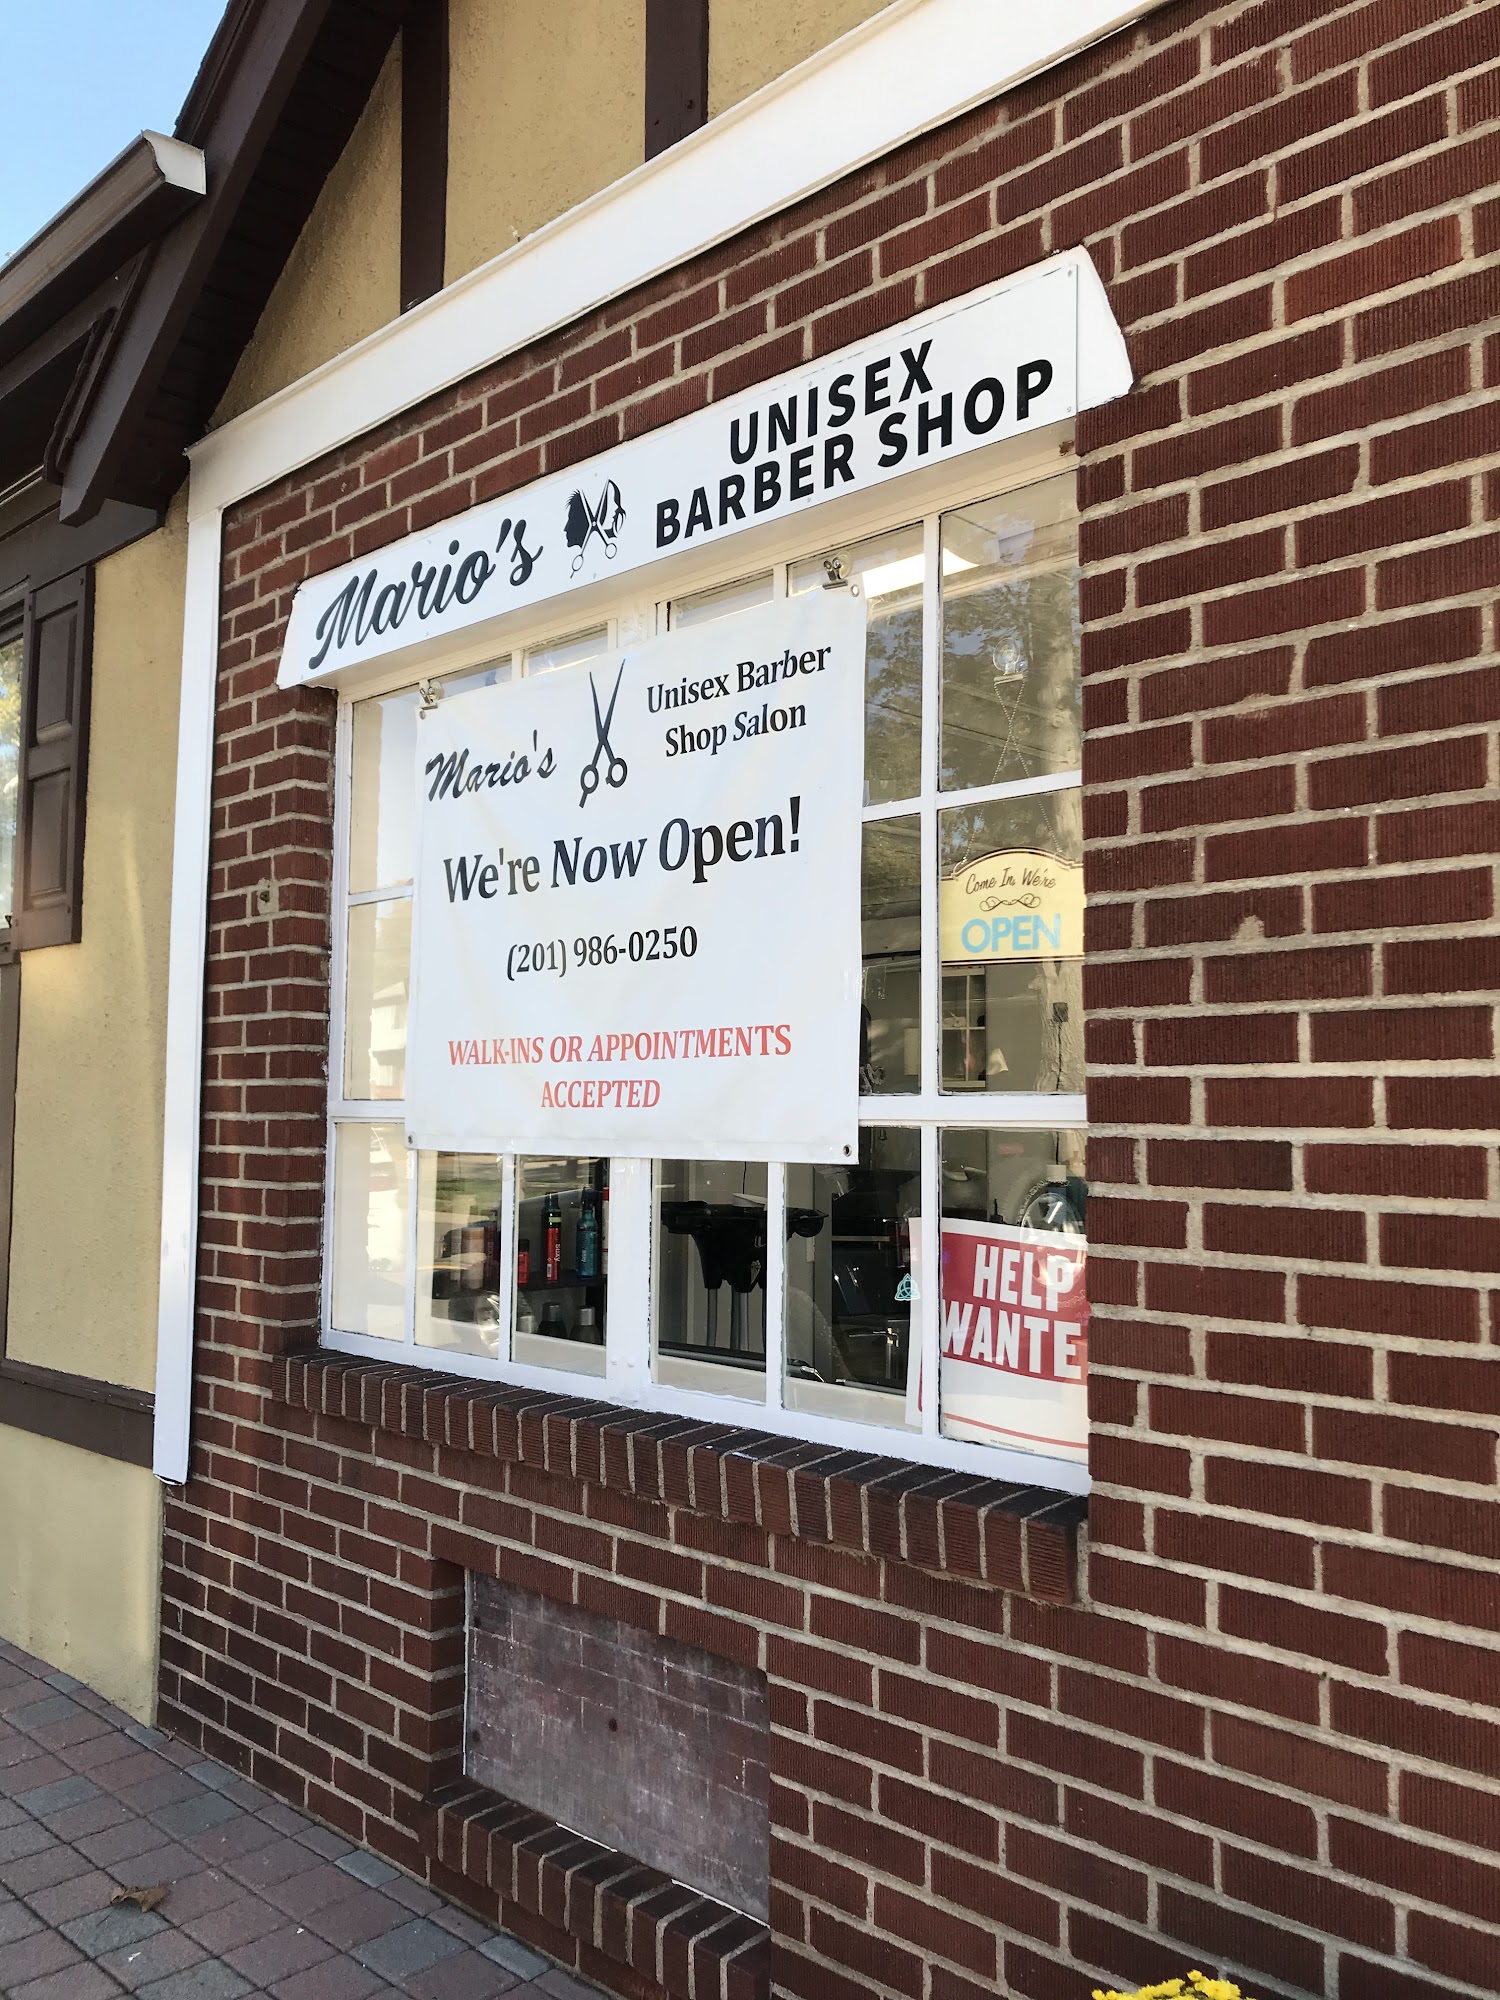 Mario's Unisex Barber Shop 201 River Rd, New Milford New Jersey 07646